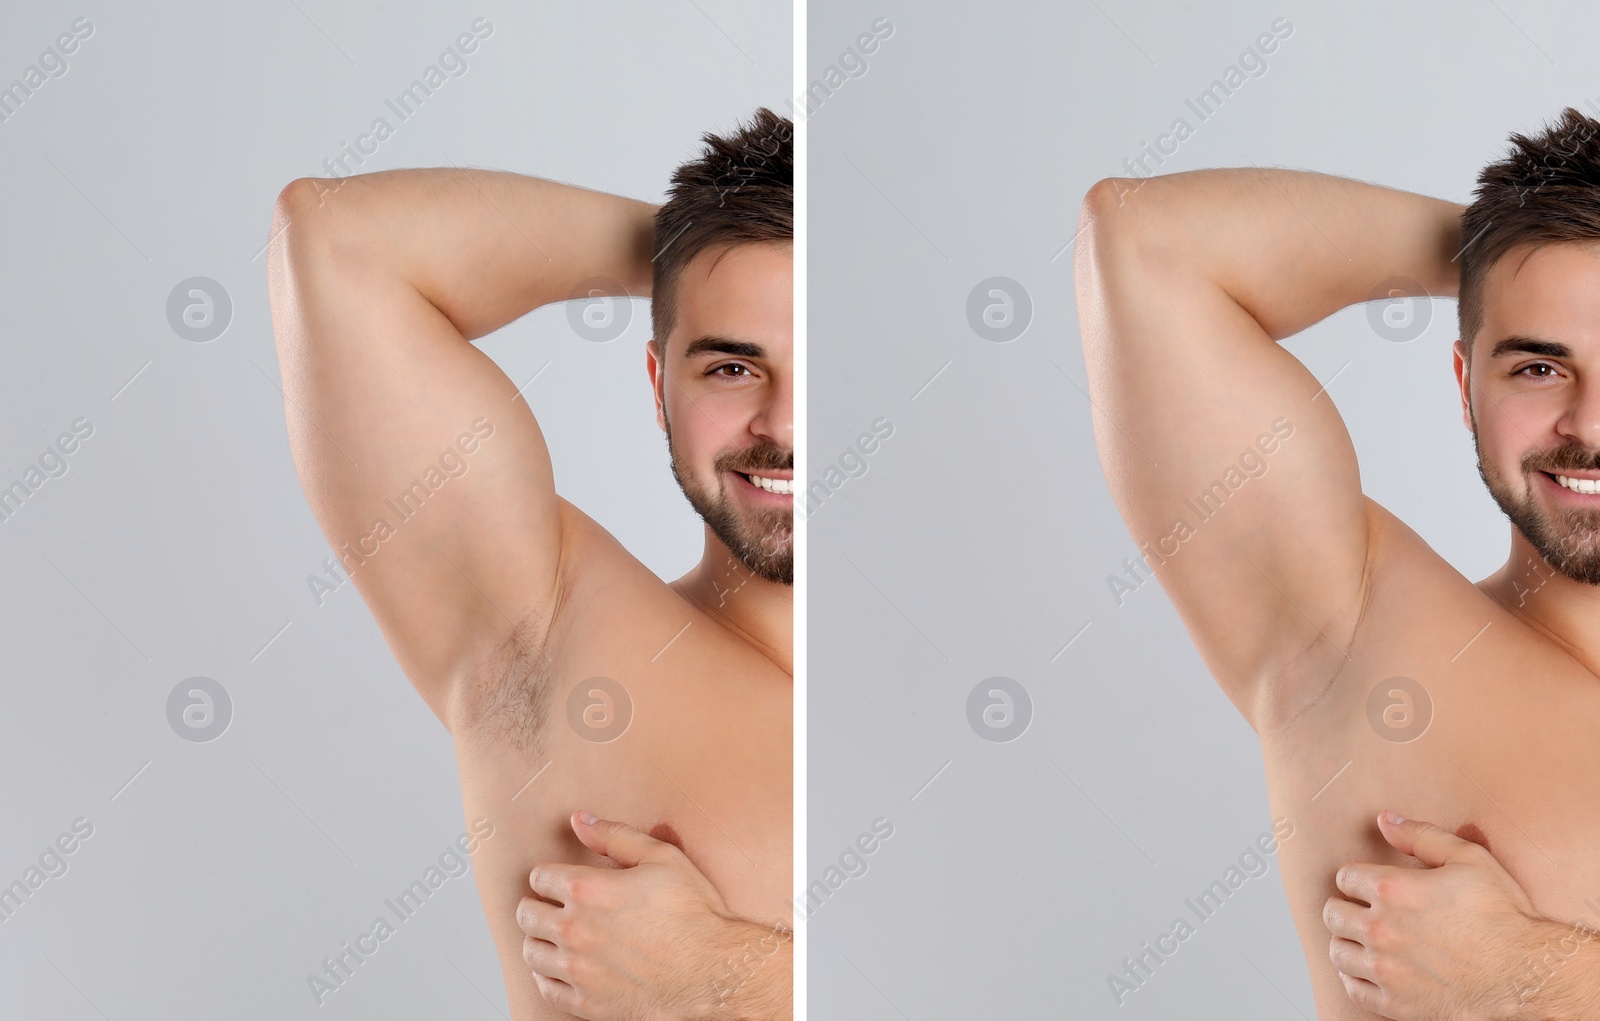 Image of Collage of man showing armpit before and after epilation on light grey background